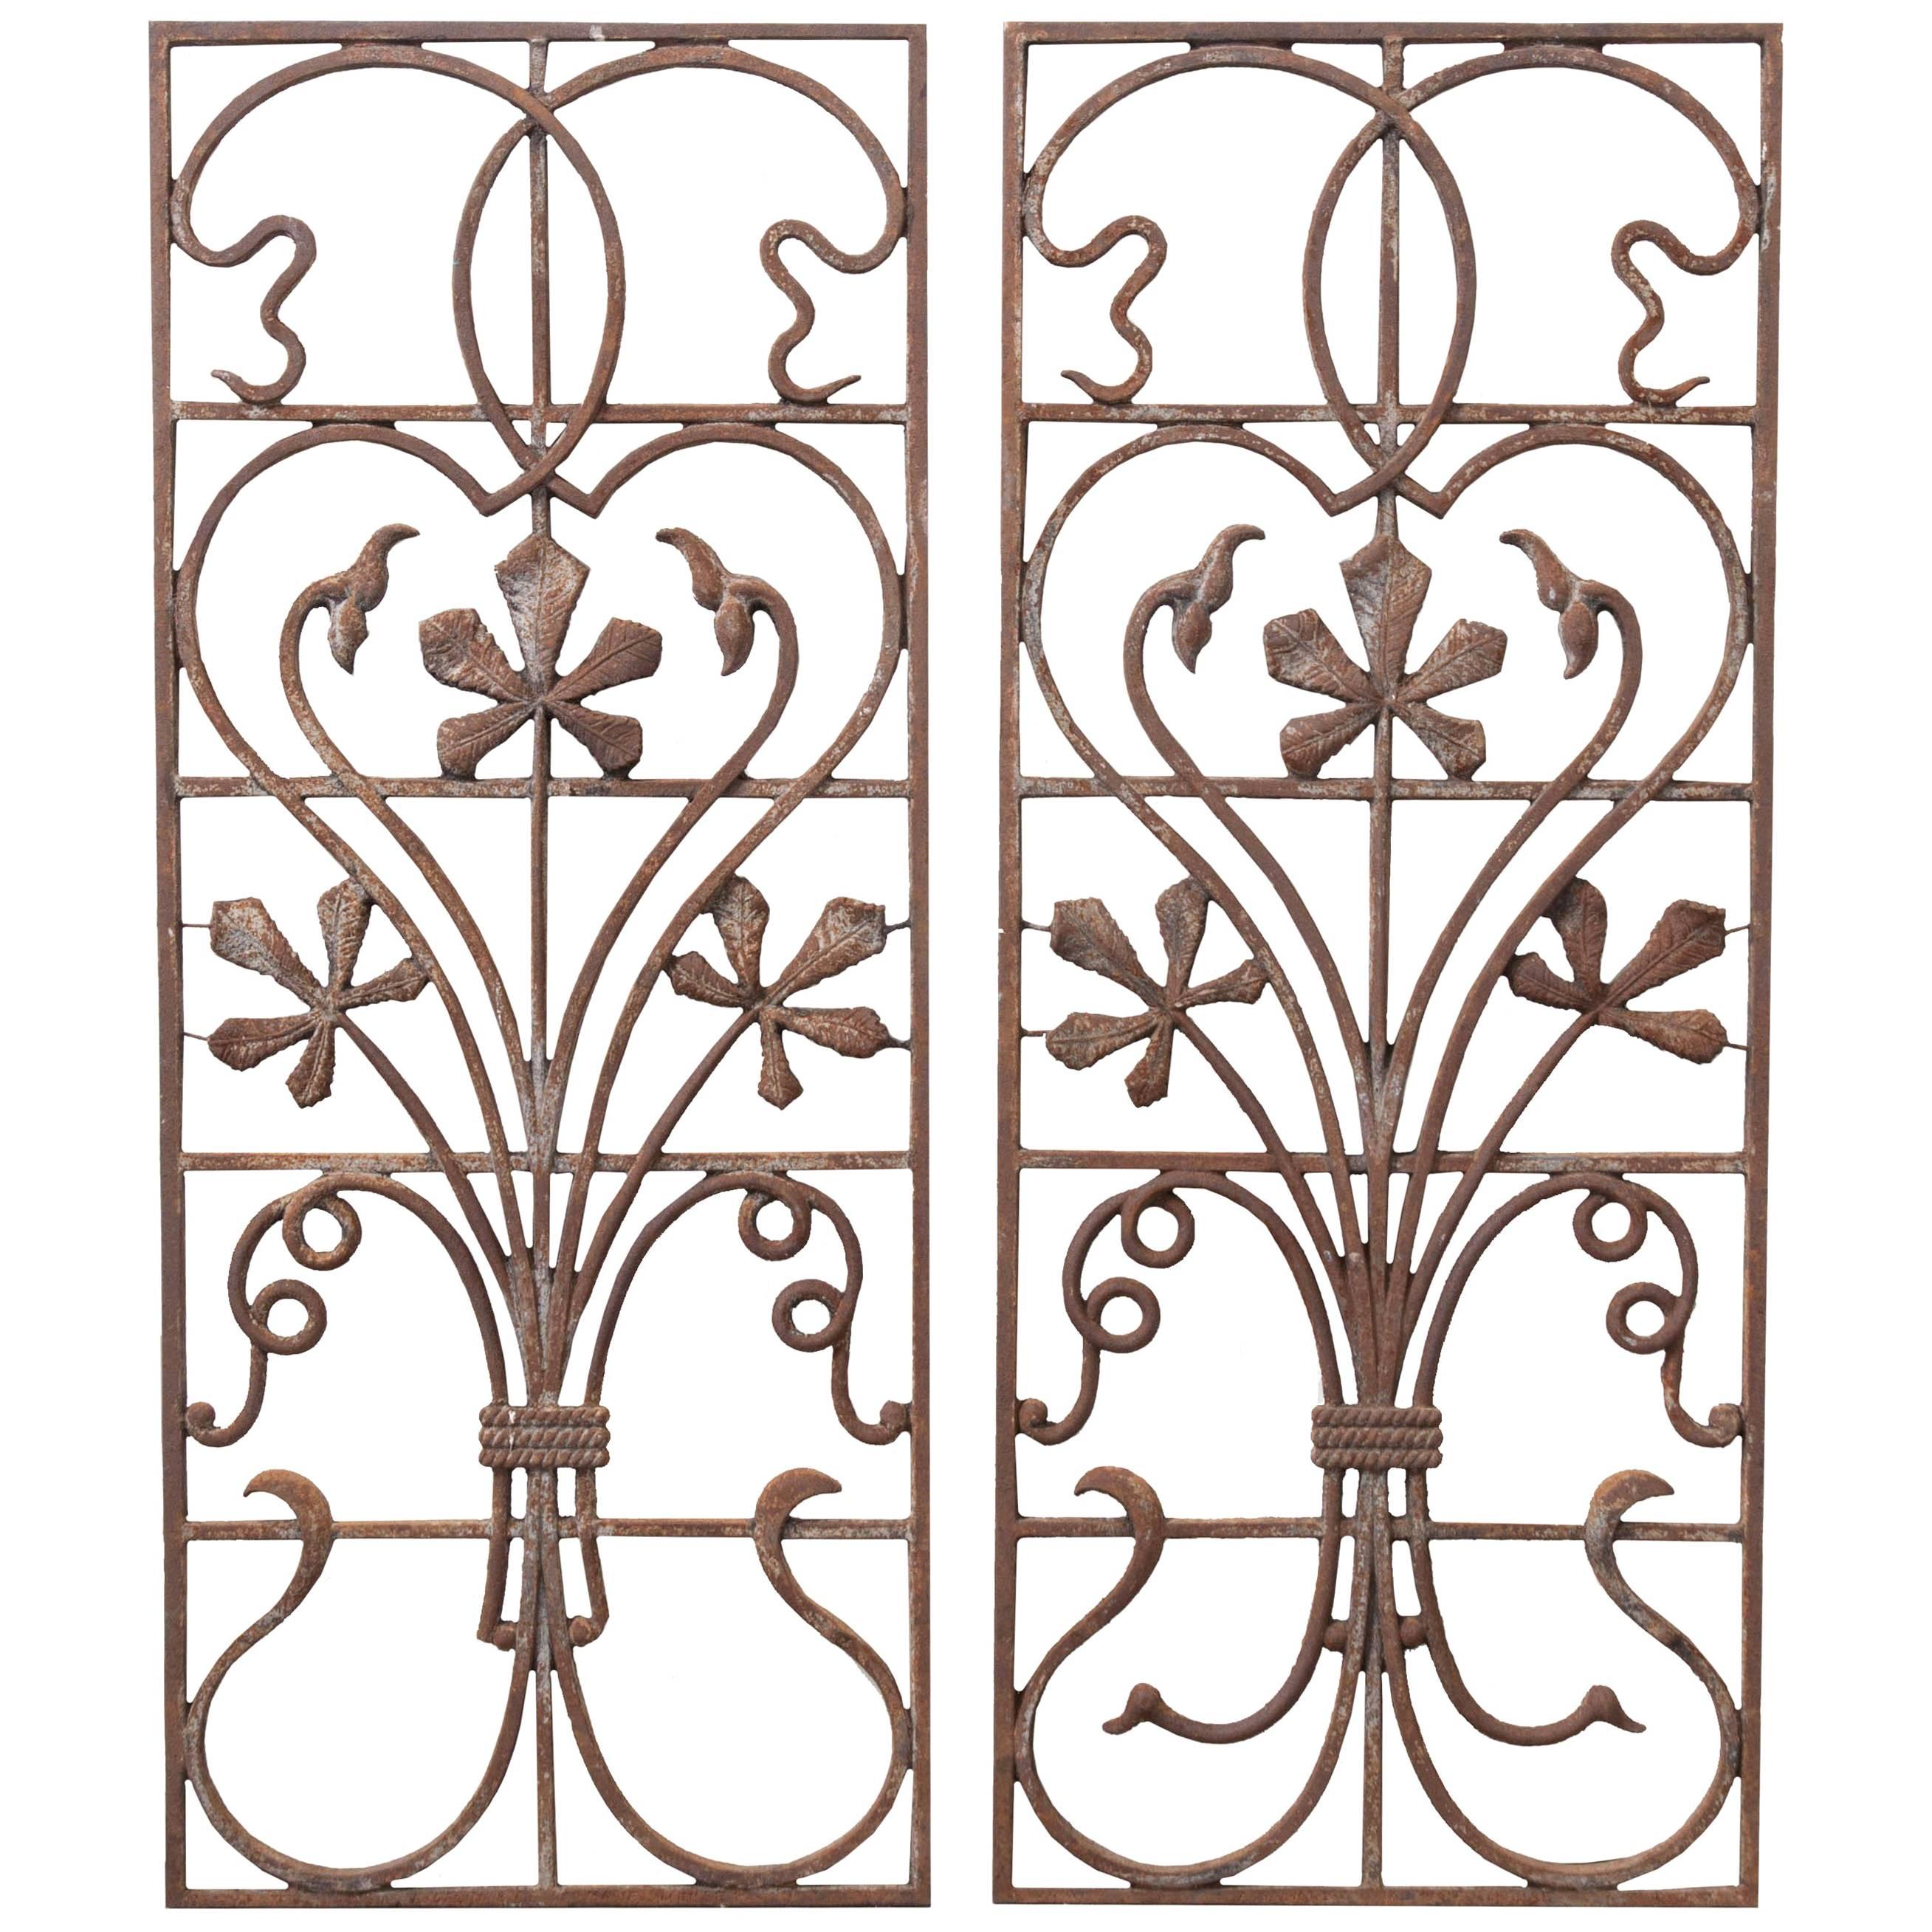 Pair of Early 20th Century Art Nouveau Wrought Iron Panels